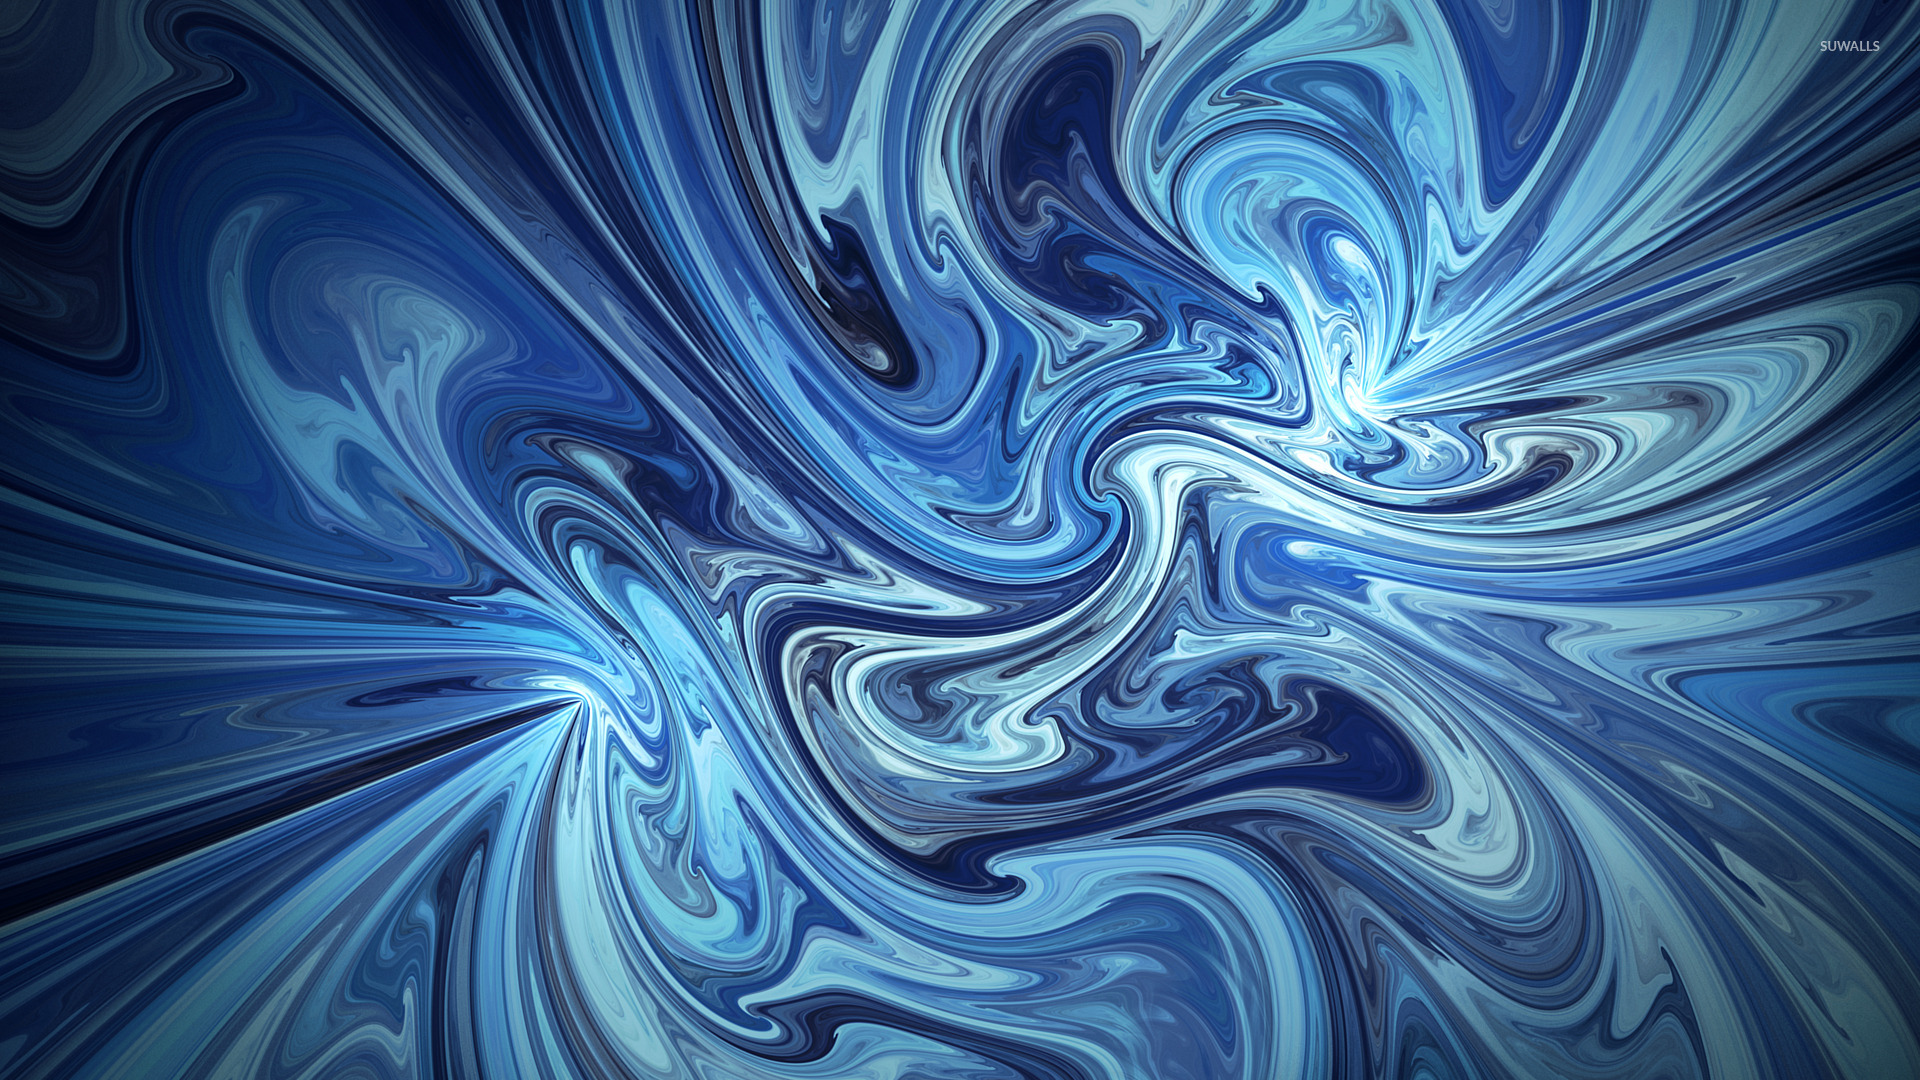  Blue paint  wallpaper Abstract wallpapers 22529